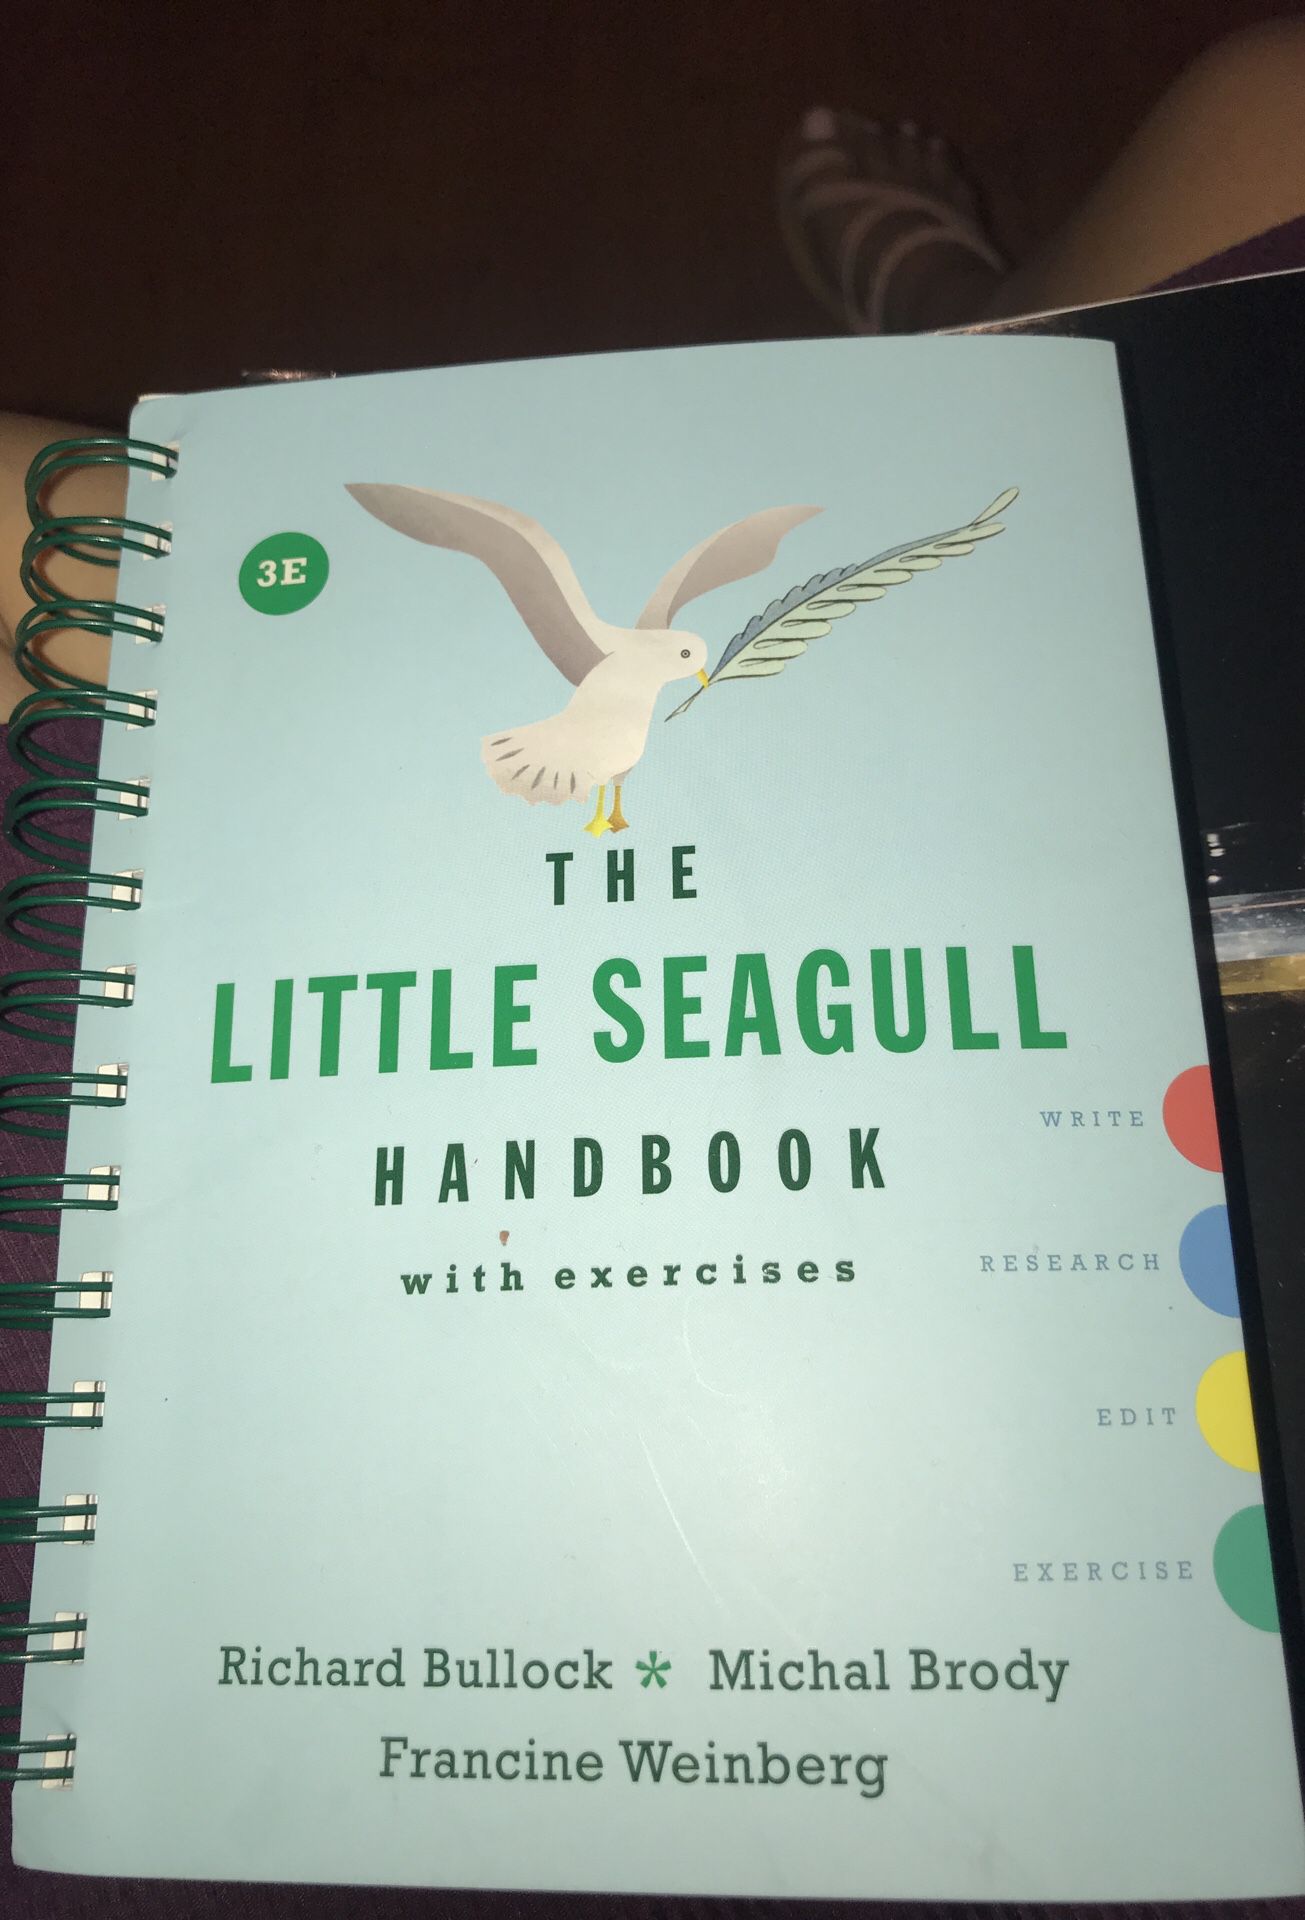 The little seagull handbook with exercises by Richard bullock